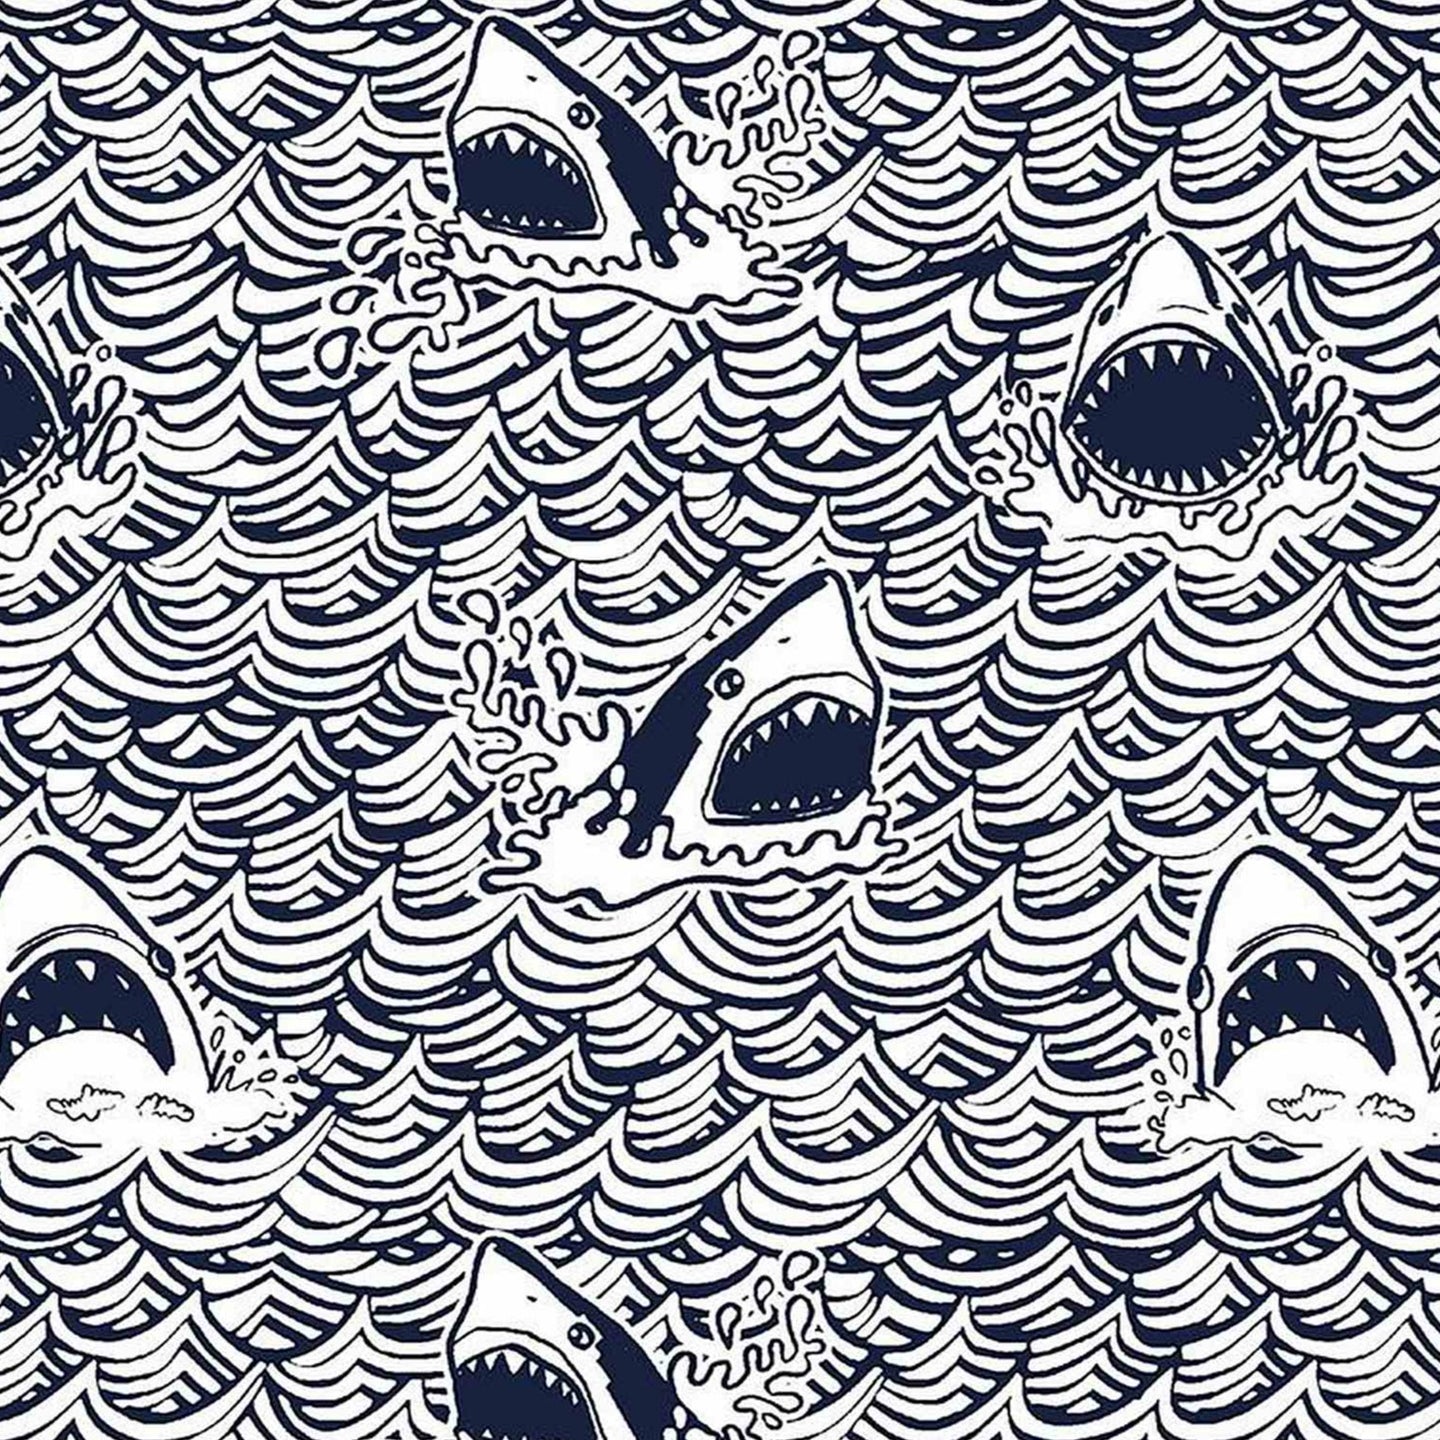 Dear Stella Dark & Stormy in Indigo blue sharks in the ocean waves teeth cotton quilting fabric material for quilt sewing kids blanket 